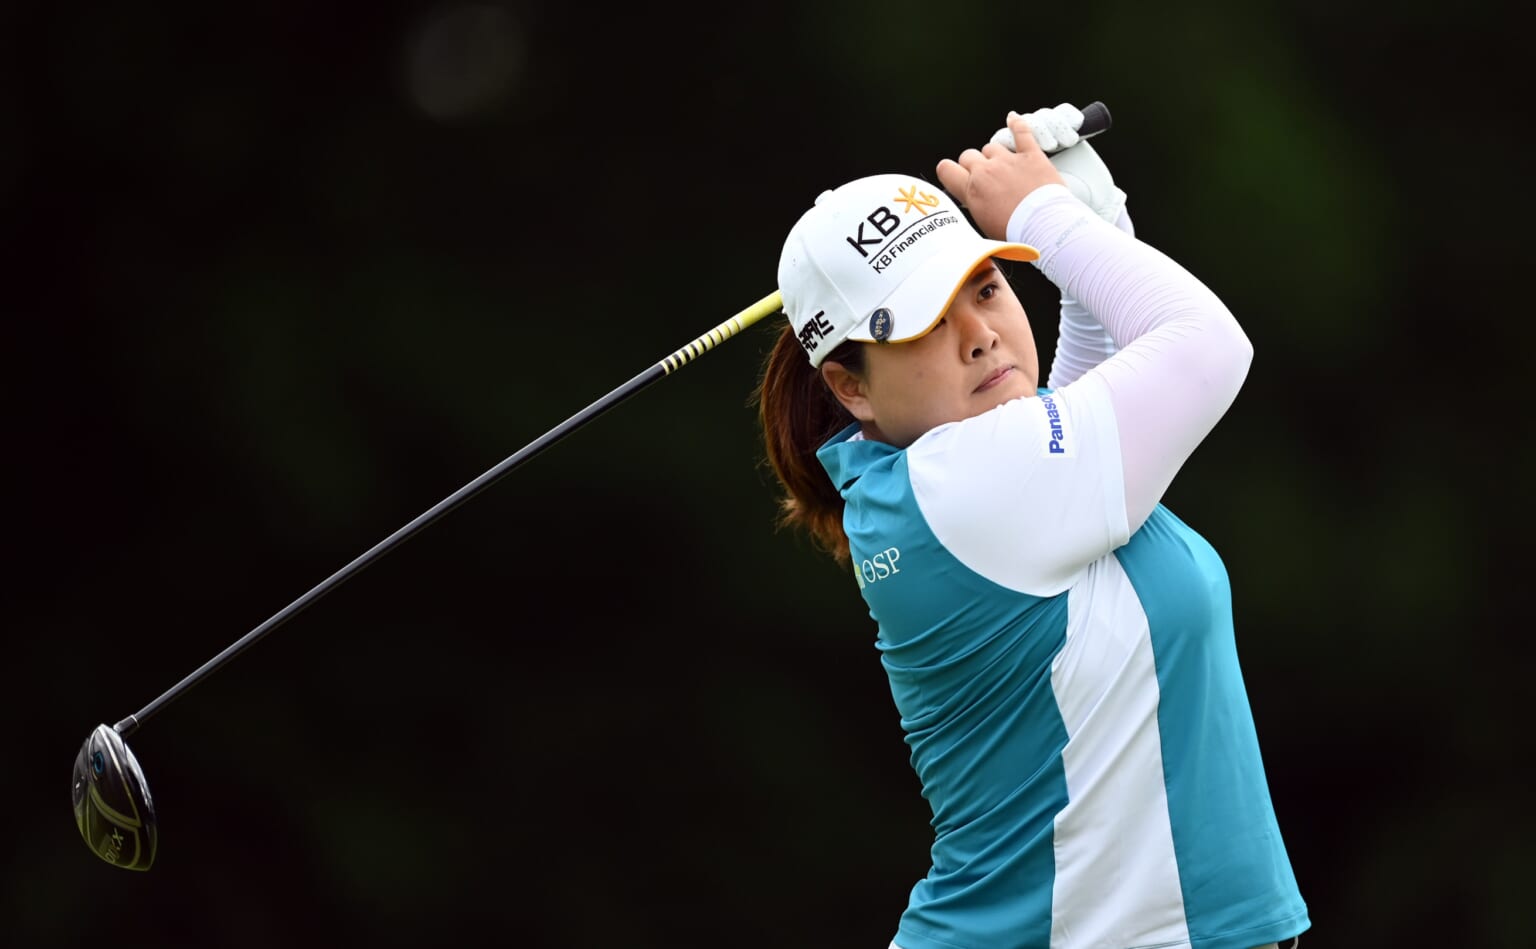 Best female golfers of all-time who dominated the women’s game on LPGA Tour